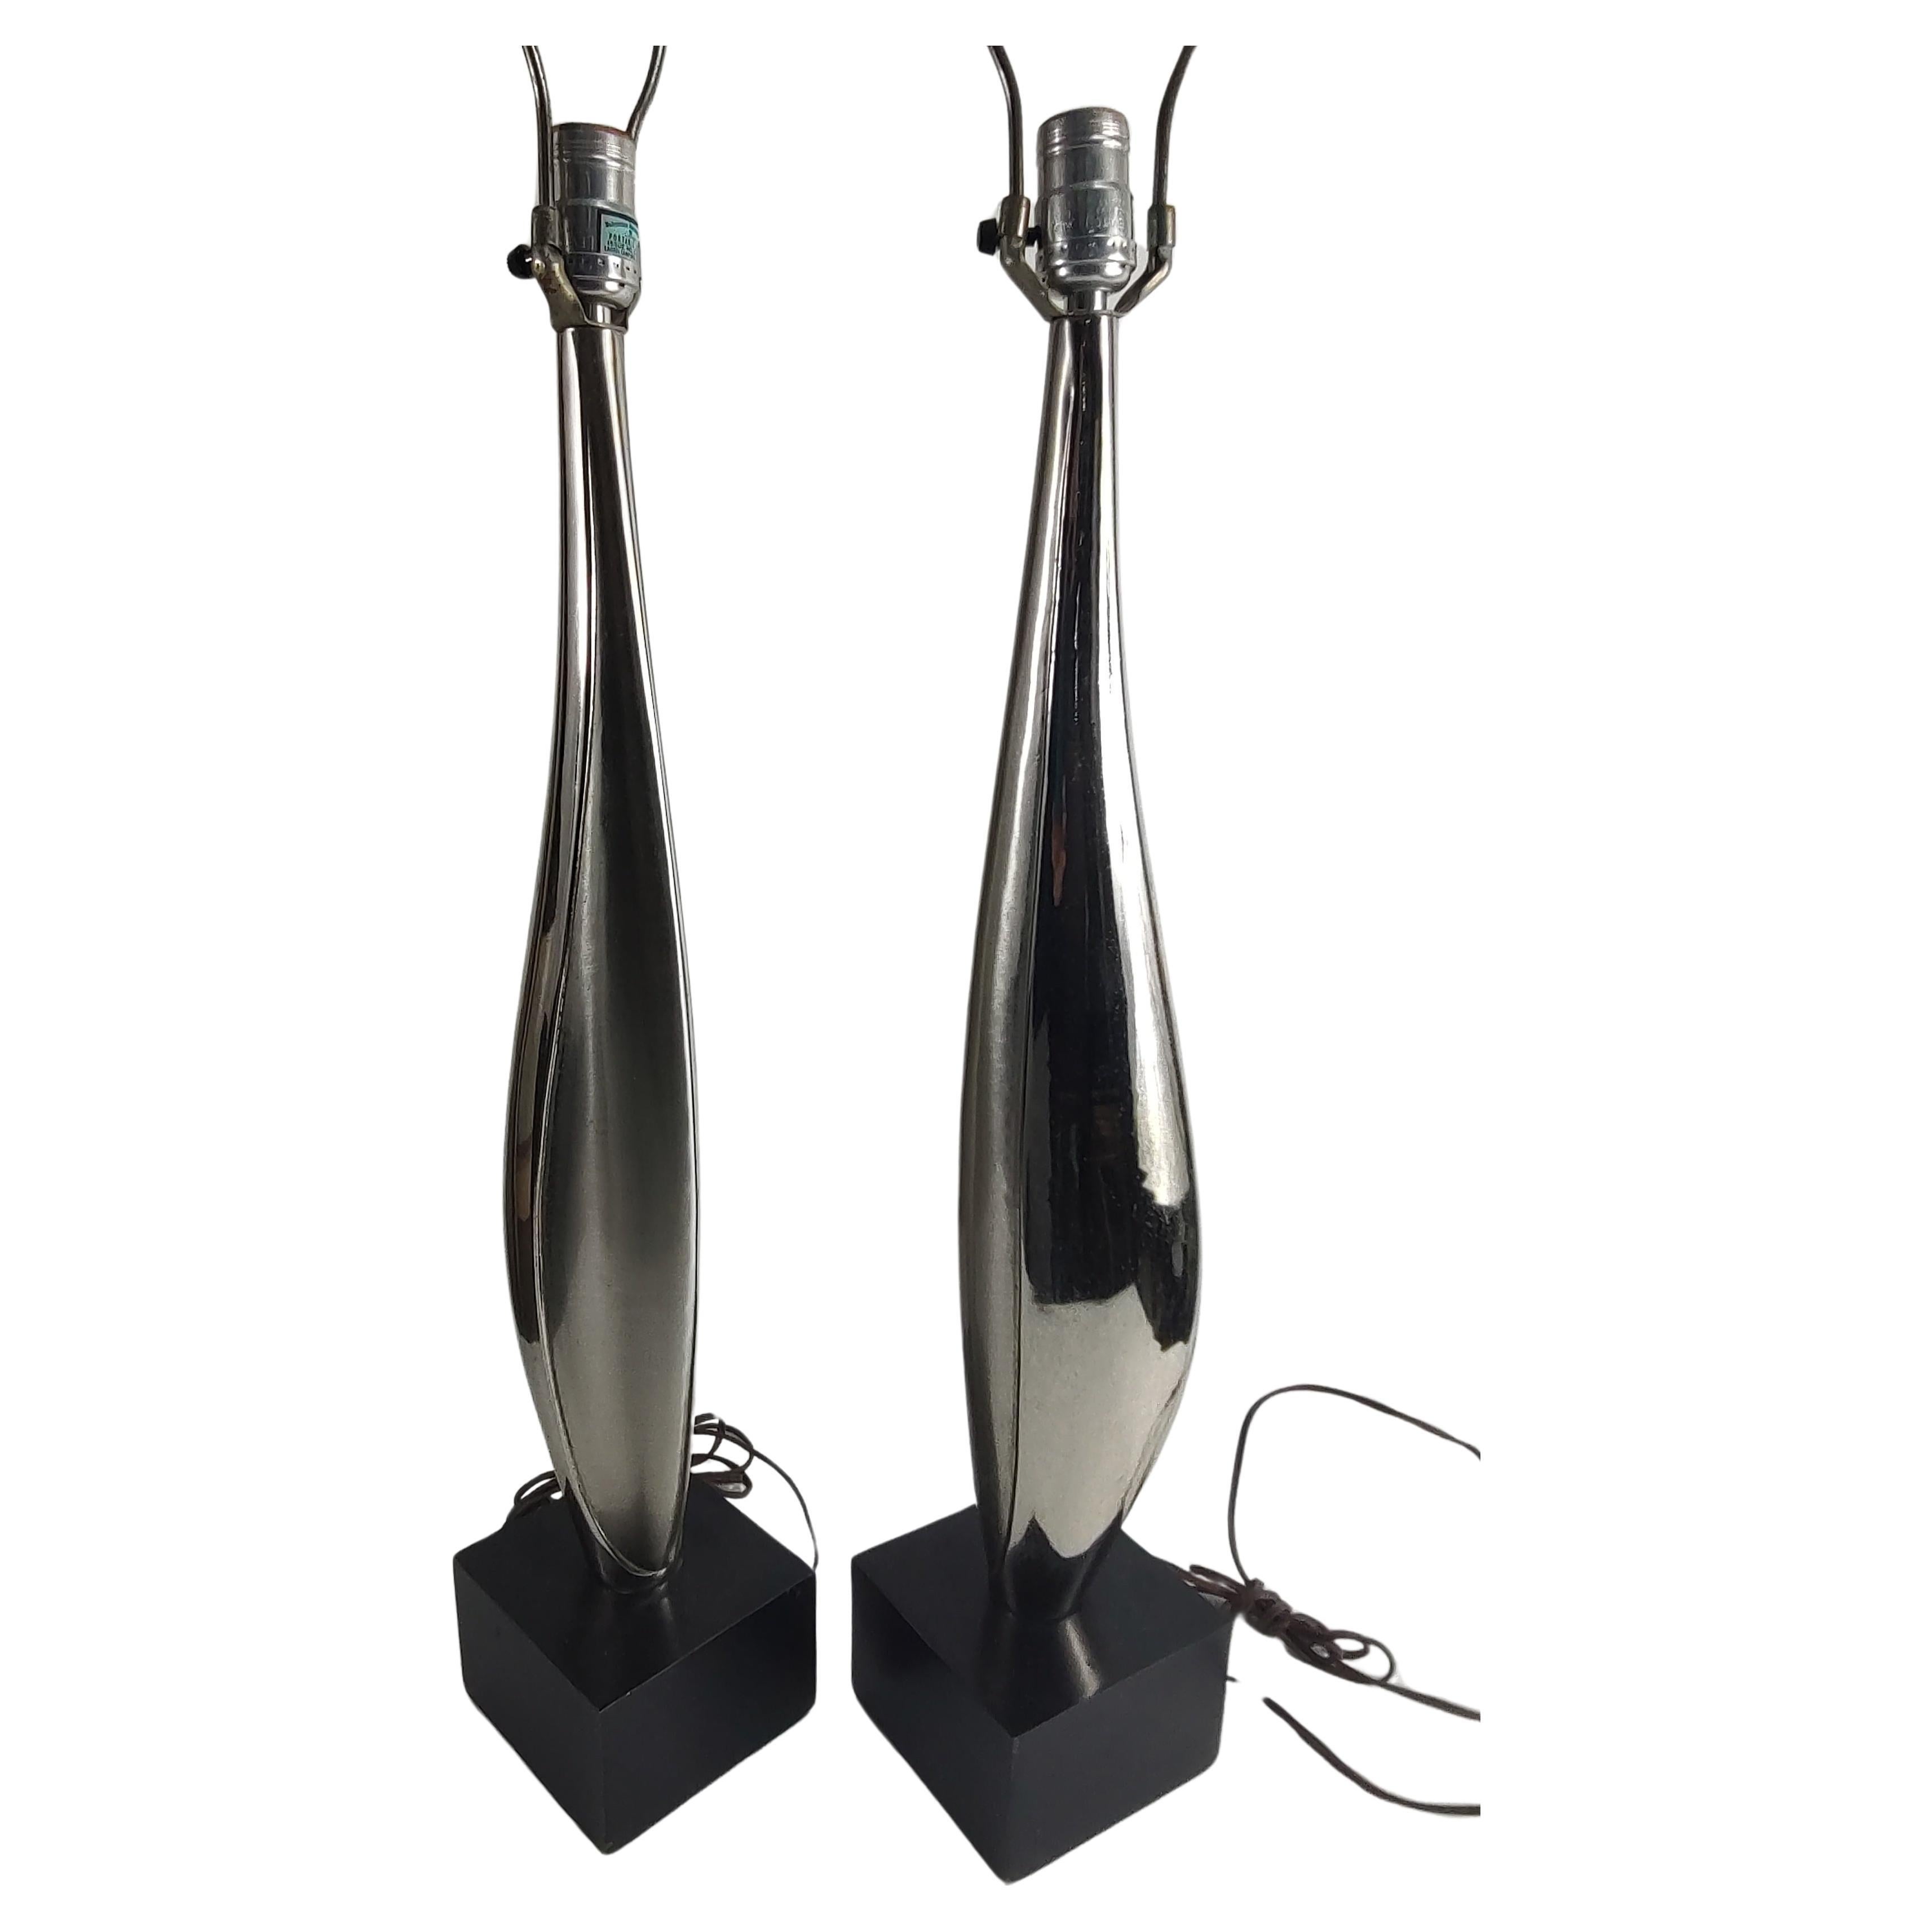 Simple and elegant pair of tall slender and sleek with a lot of sexy style. Chromed abstract figural central figures sitting on black plinths. 5 x 5 x 39h to the top of the finial. In excellent vintage condition with minimal wear, age related.